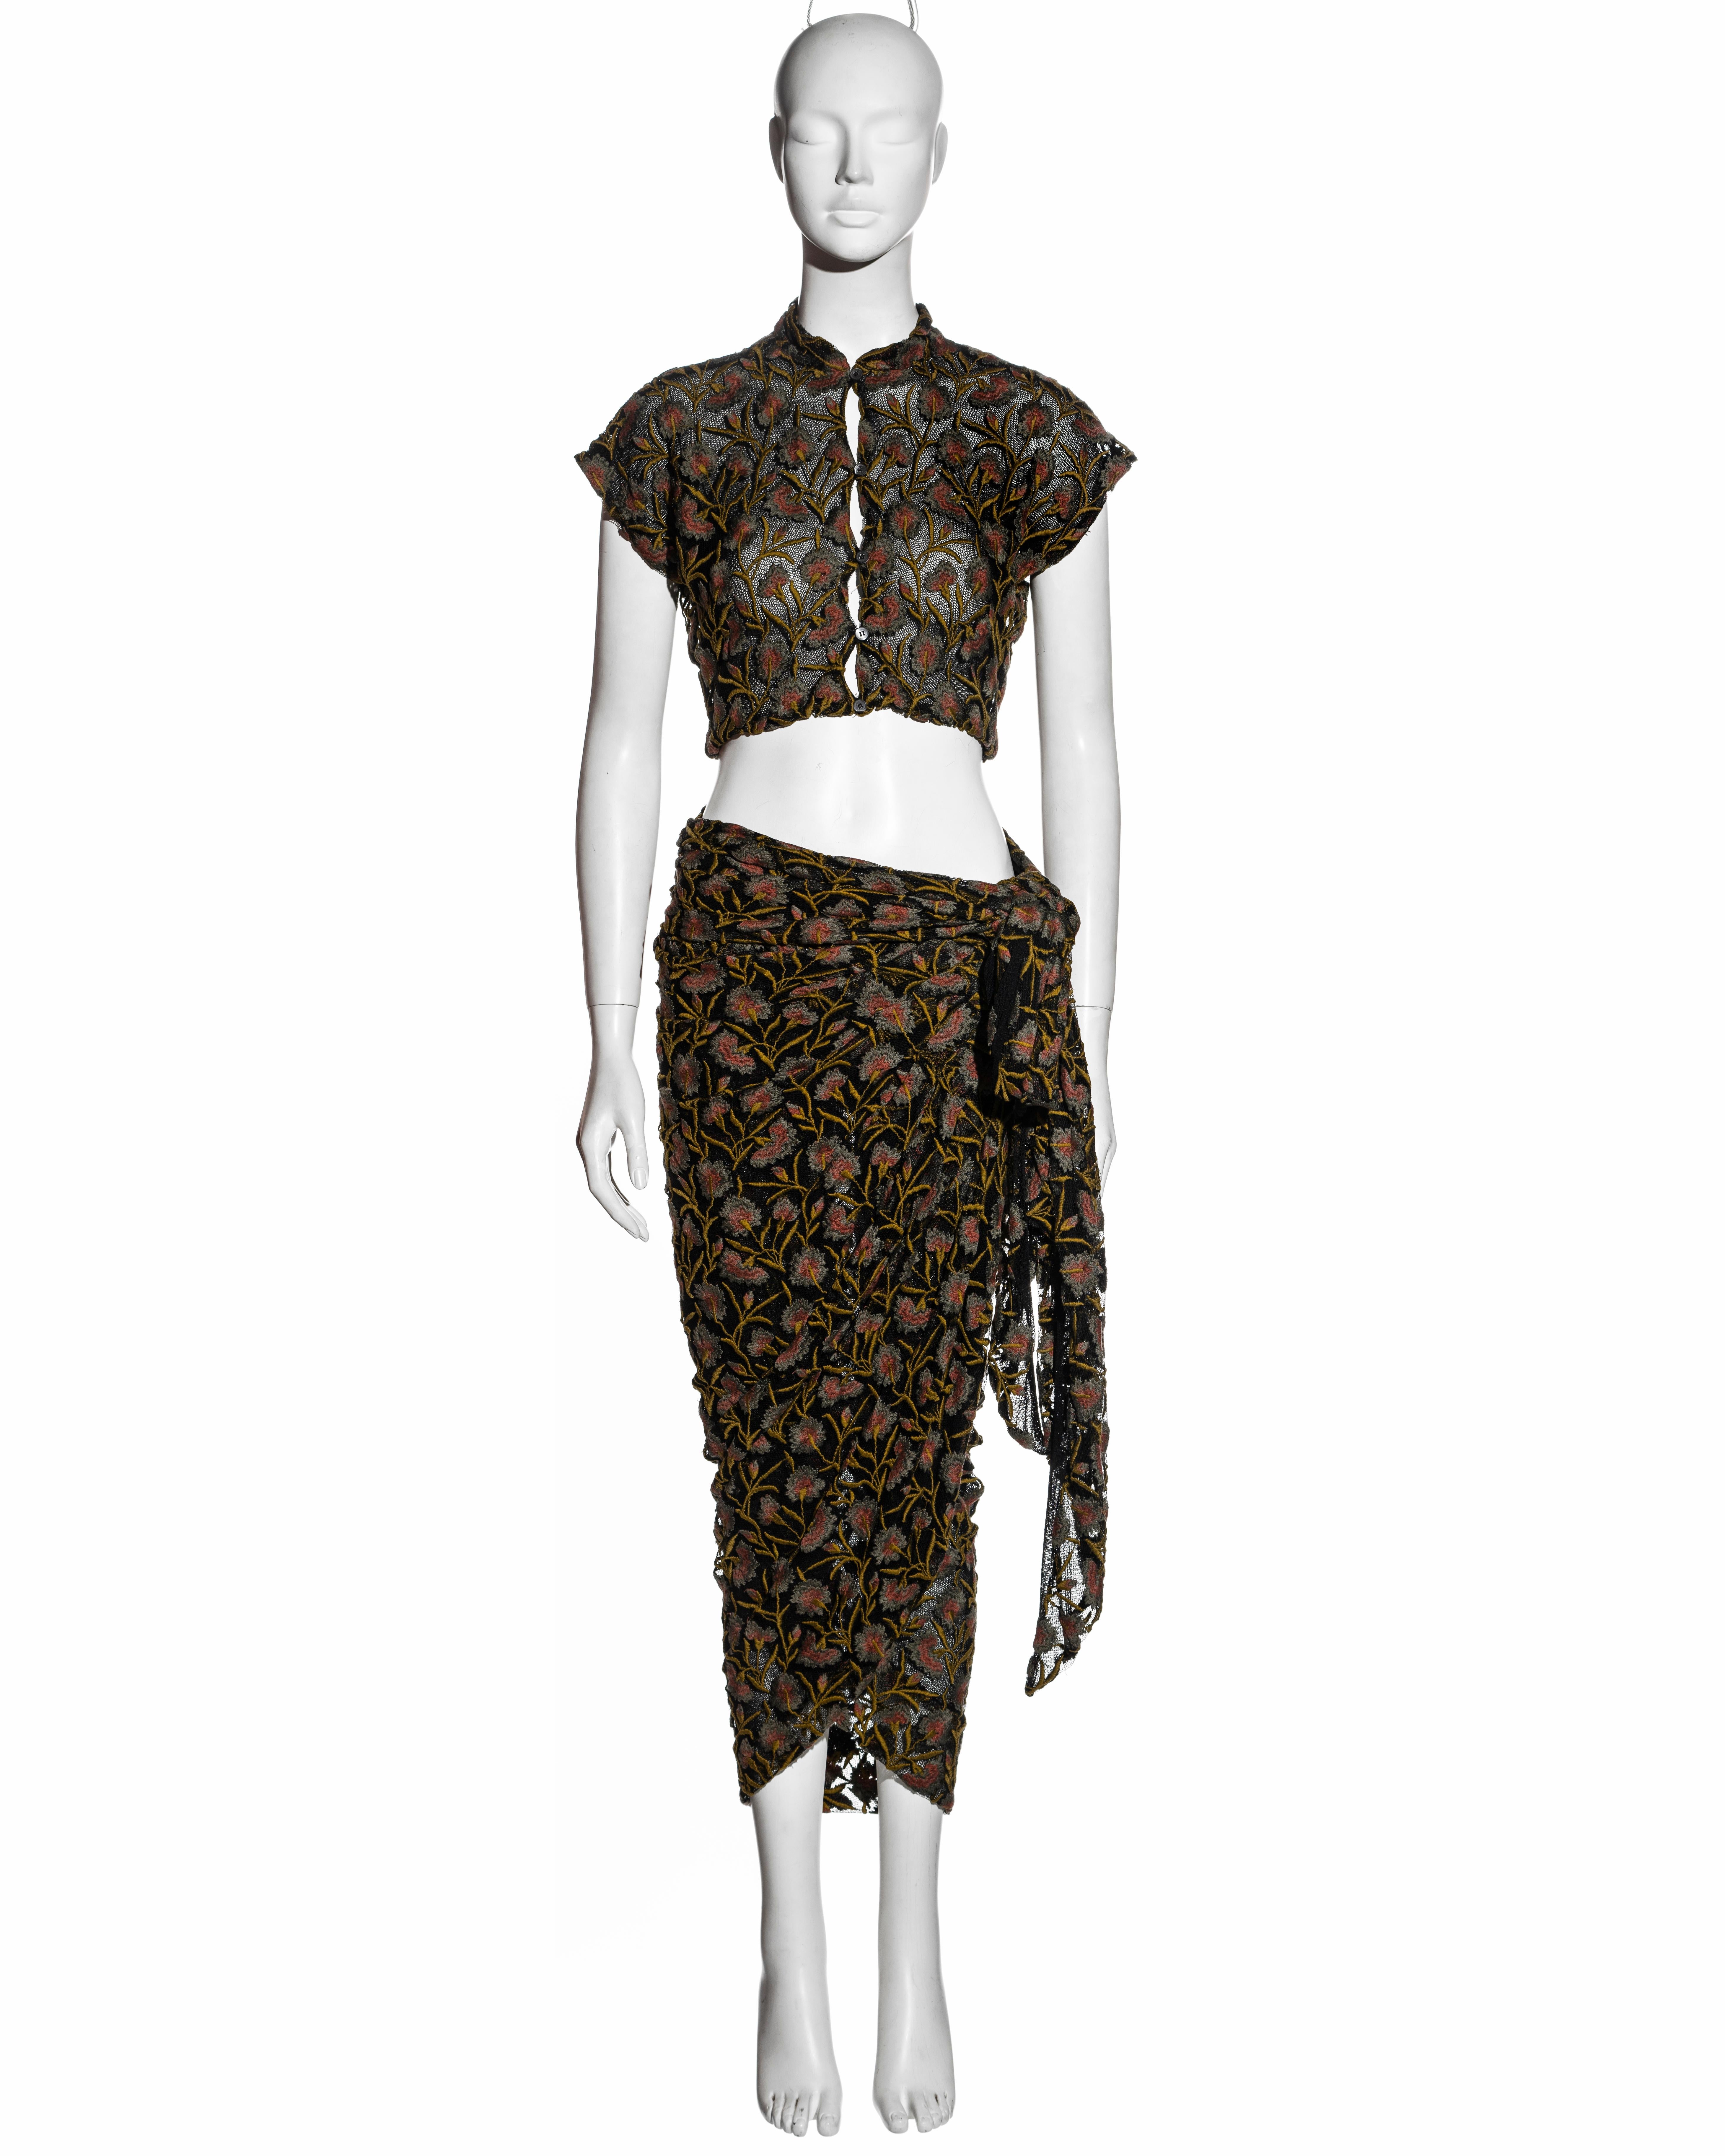 ▪ Callaghan blouse and skirt set
▪ Designed by Romeo Gigli
▪ Black cotton-mesh with intricate floral embroidery allover 
▪ Cropped button-up blouse with cap sleeves 
▪ Circular cut wrap skirt with long ties which bind around the waist 
▪ IT 40 - FR